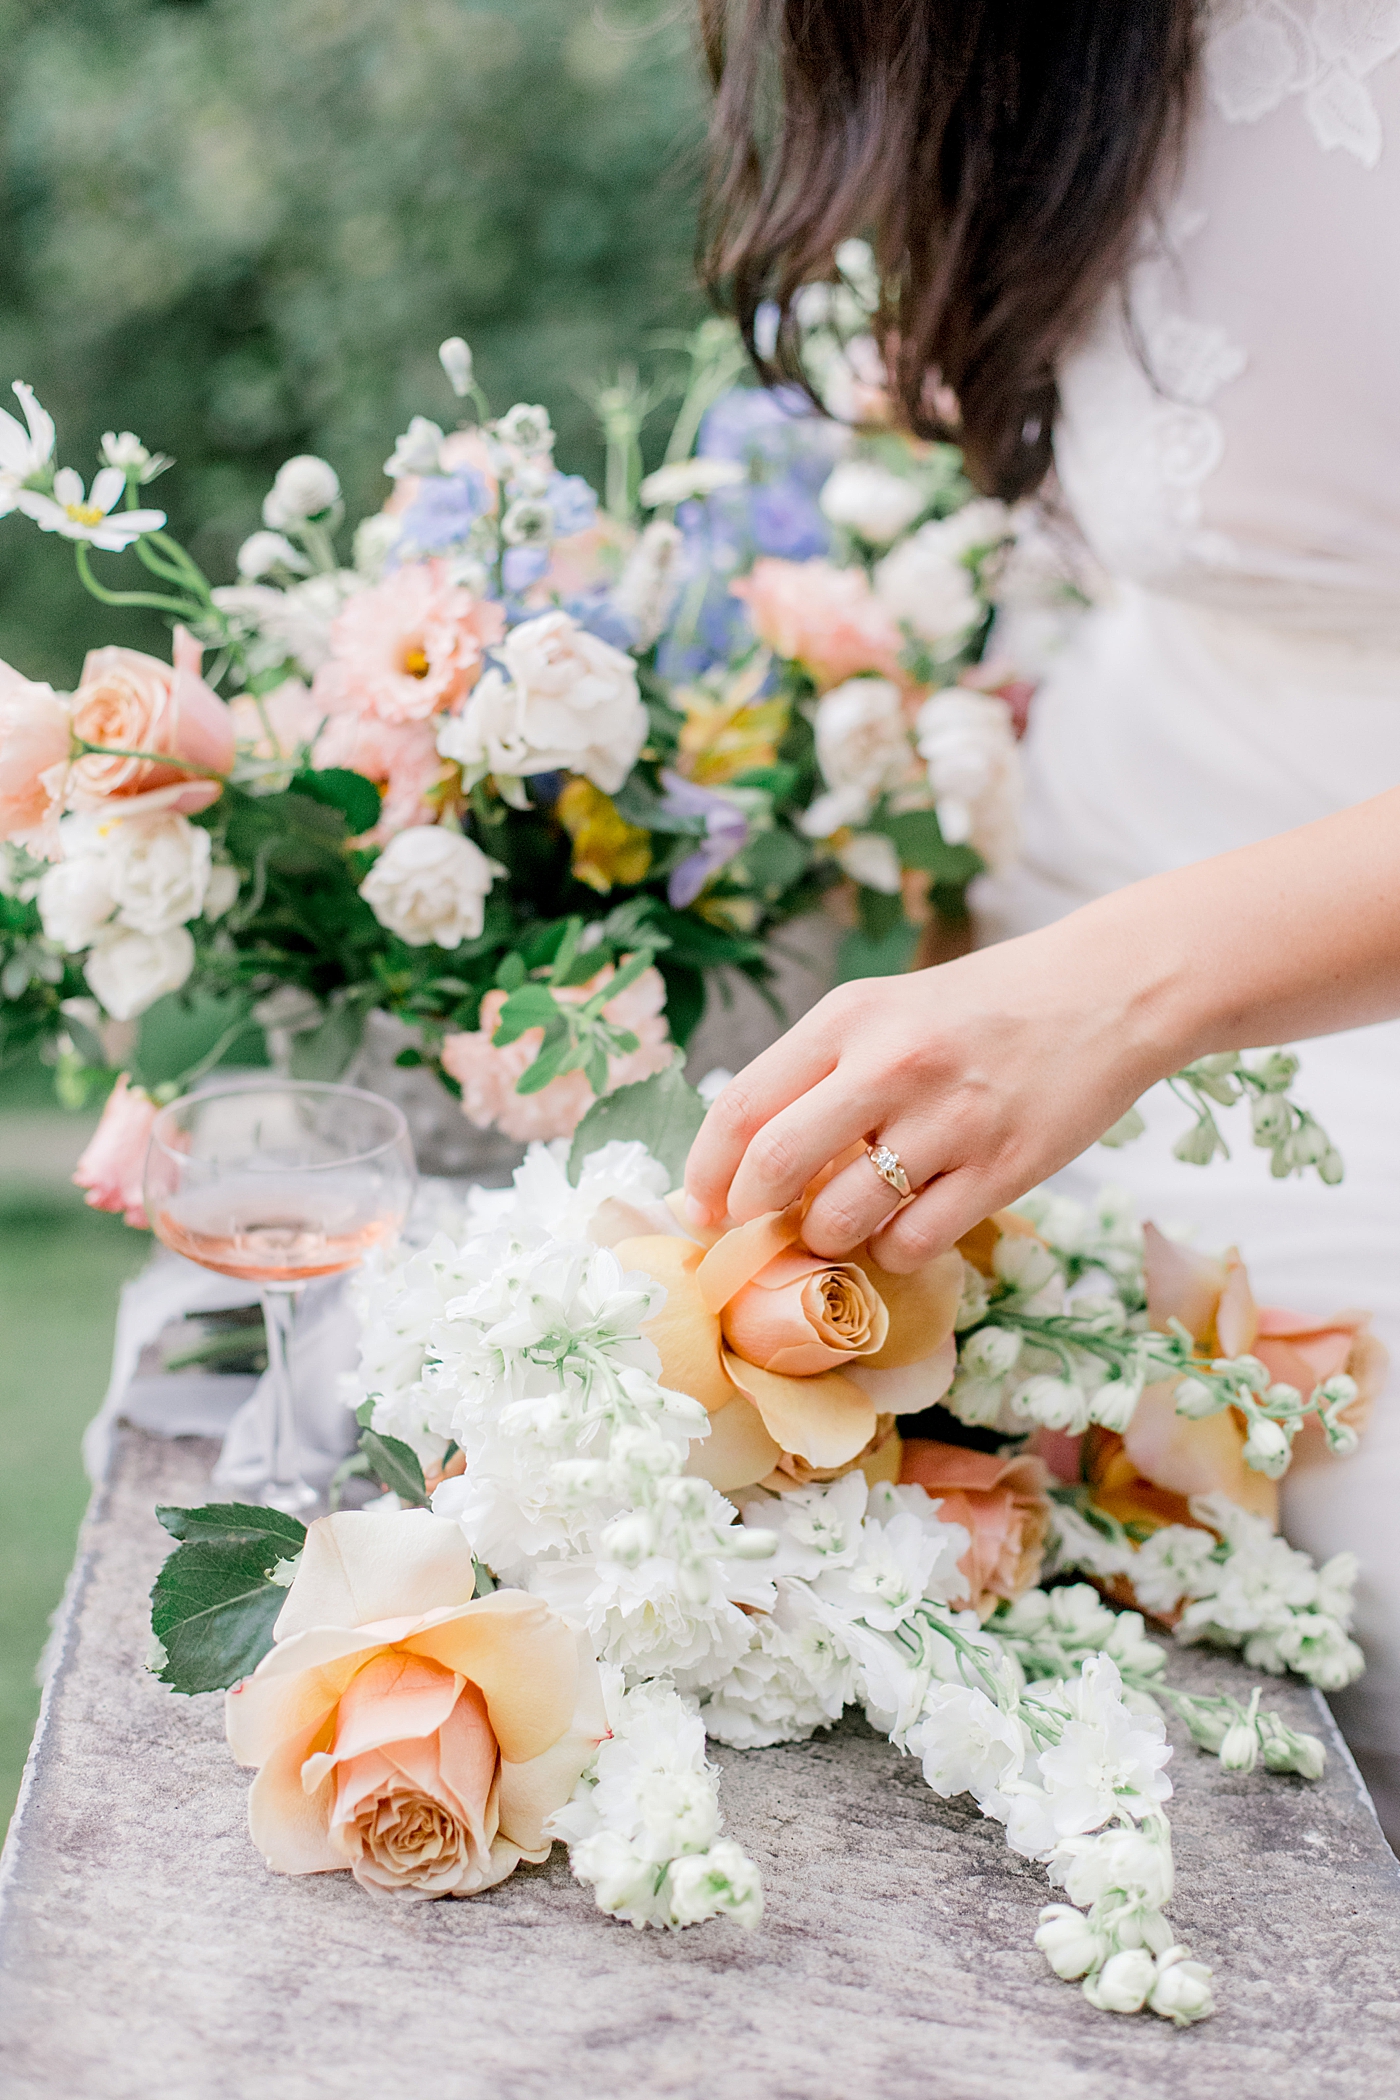 Bride in a white lace dress adjusting her bouquet with peach roses | Image by Hope Helmuth Photography